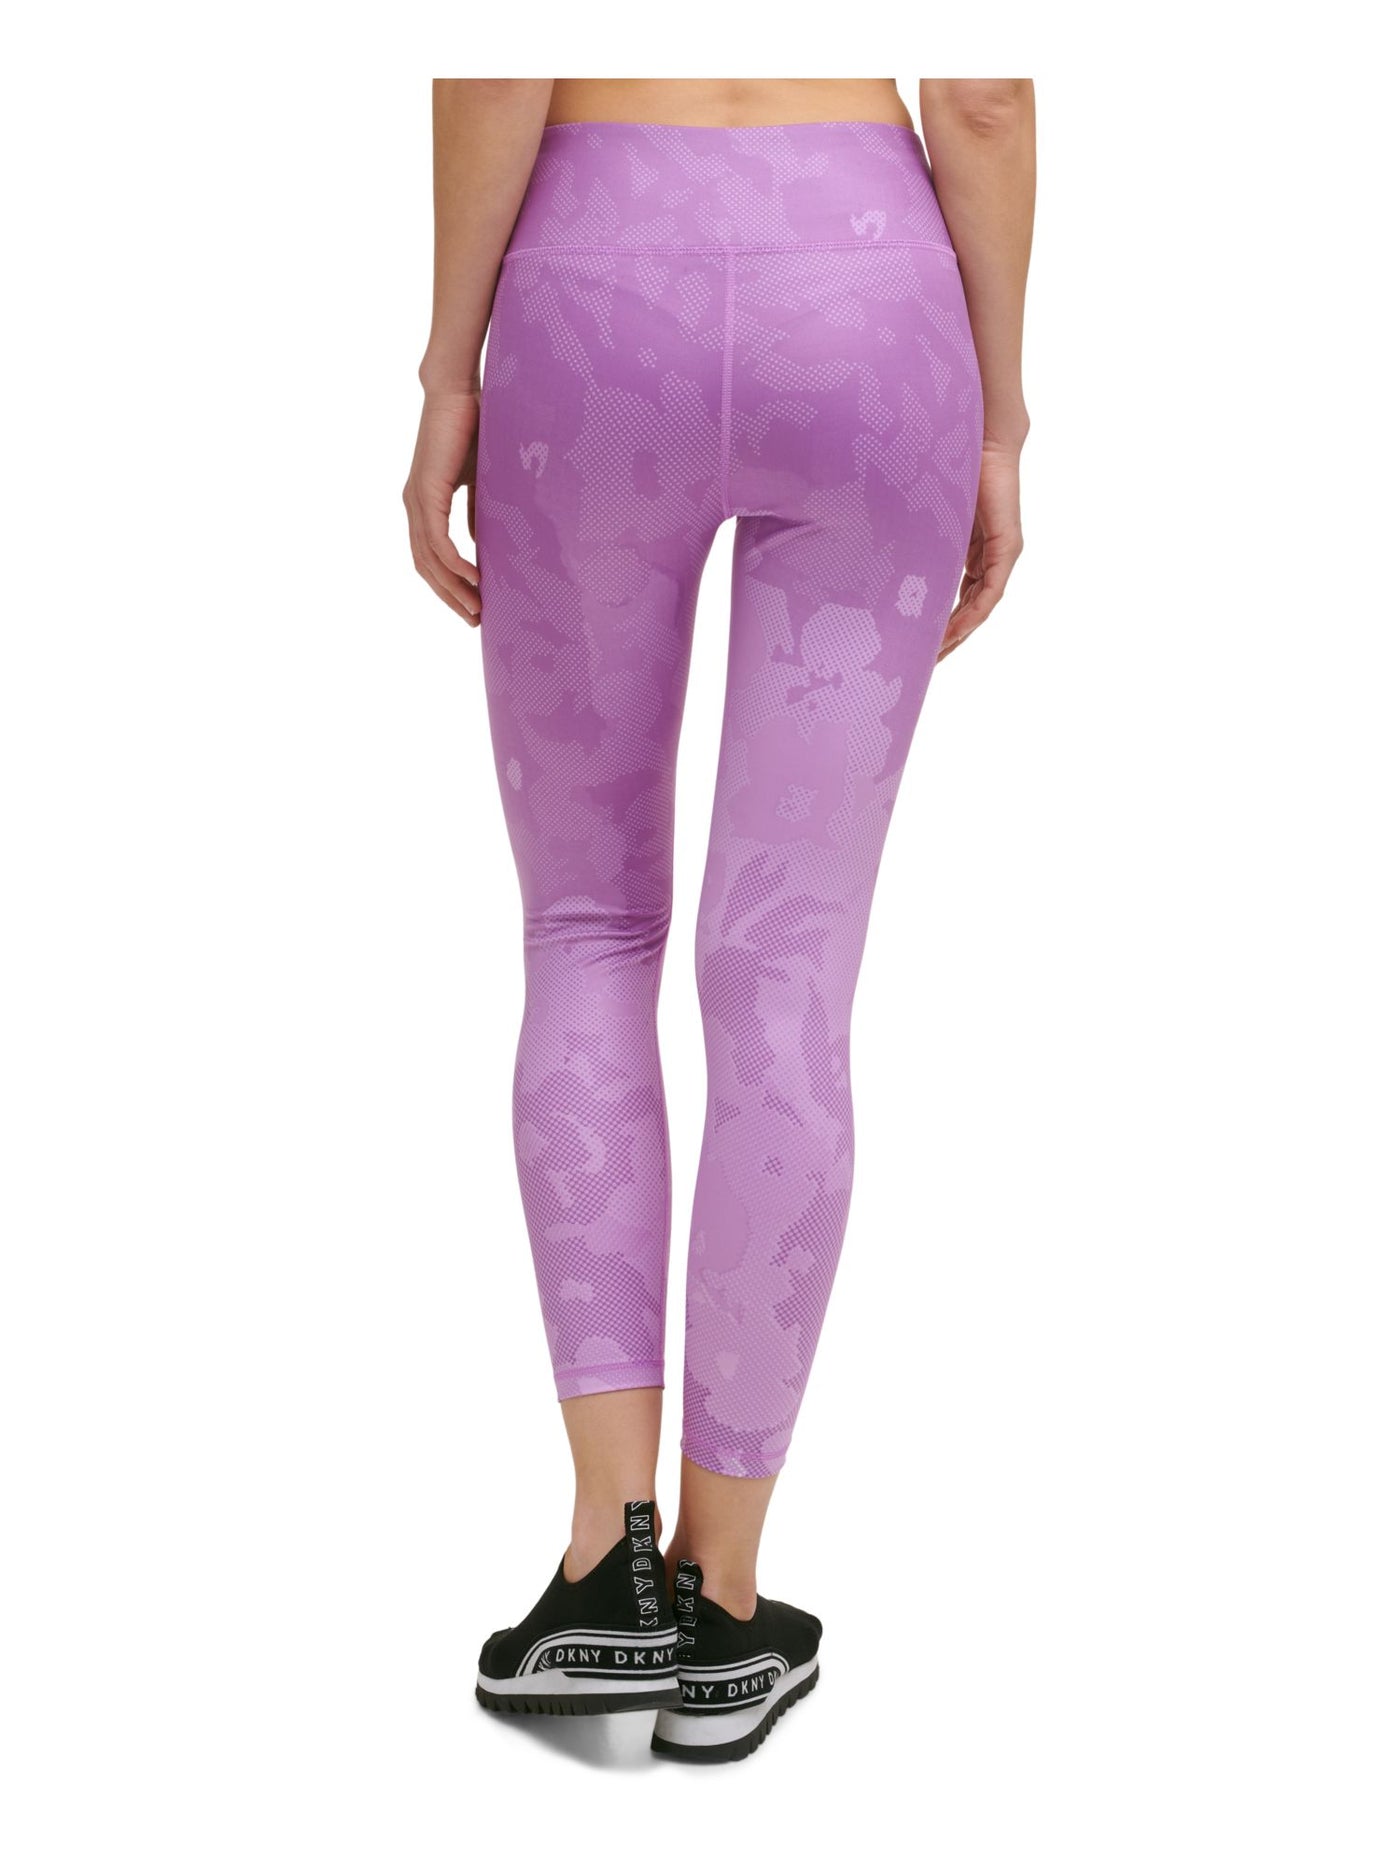 DKNY Womens Purple Moisture Wicking Pocketed Stretch Pull On Style Printed Active Wear High Waist Leggings M